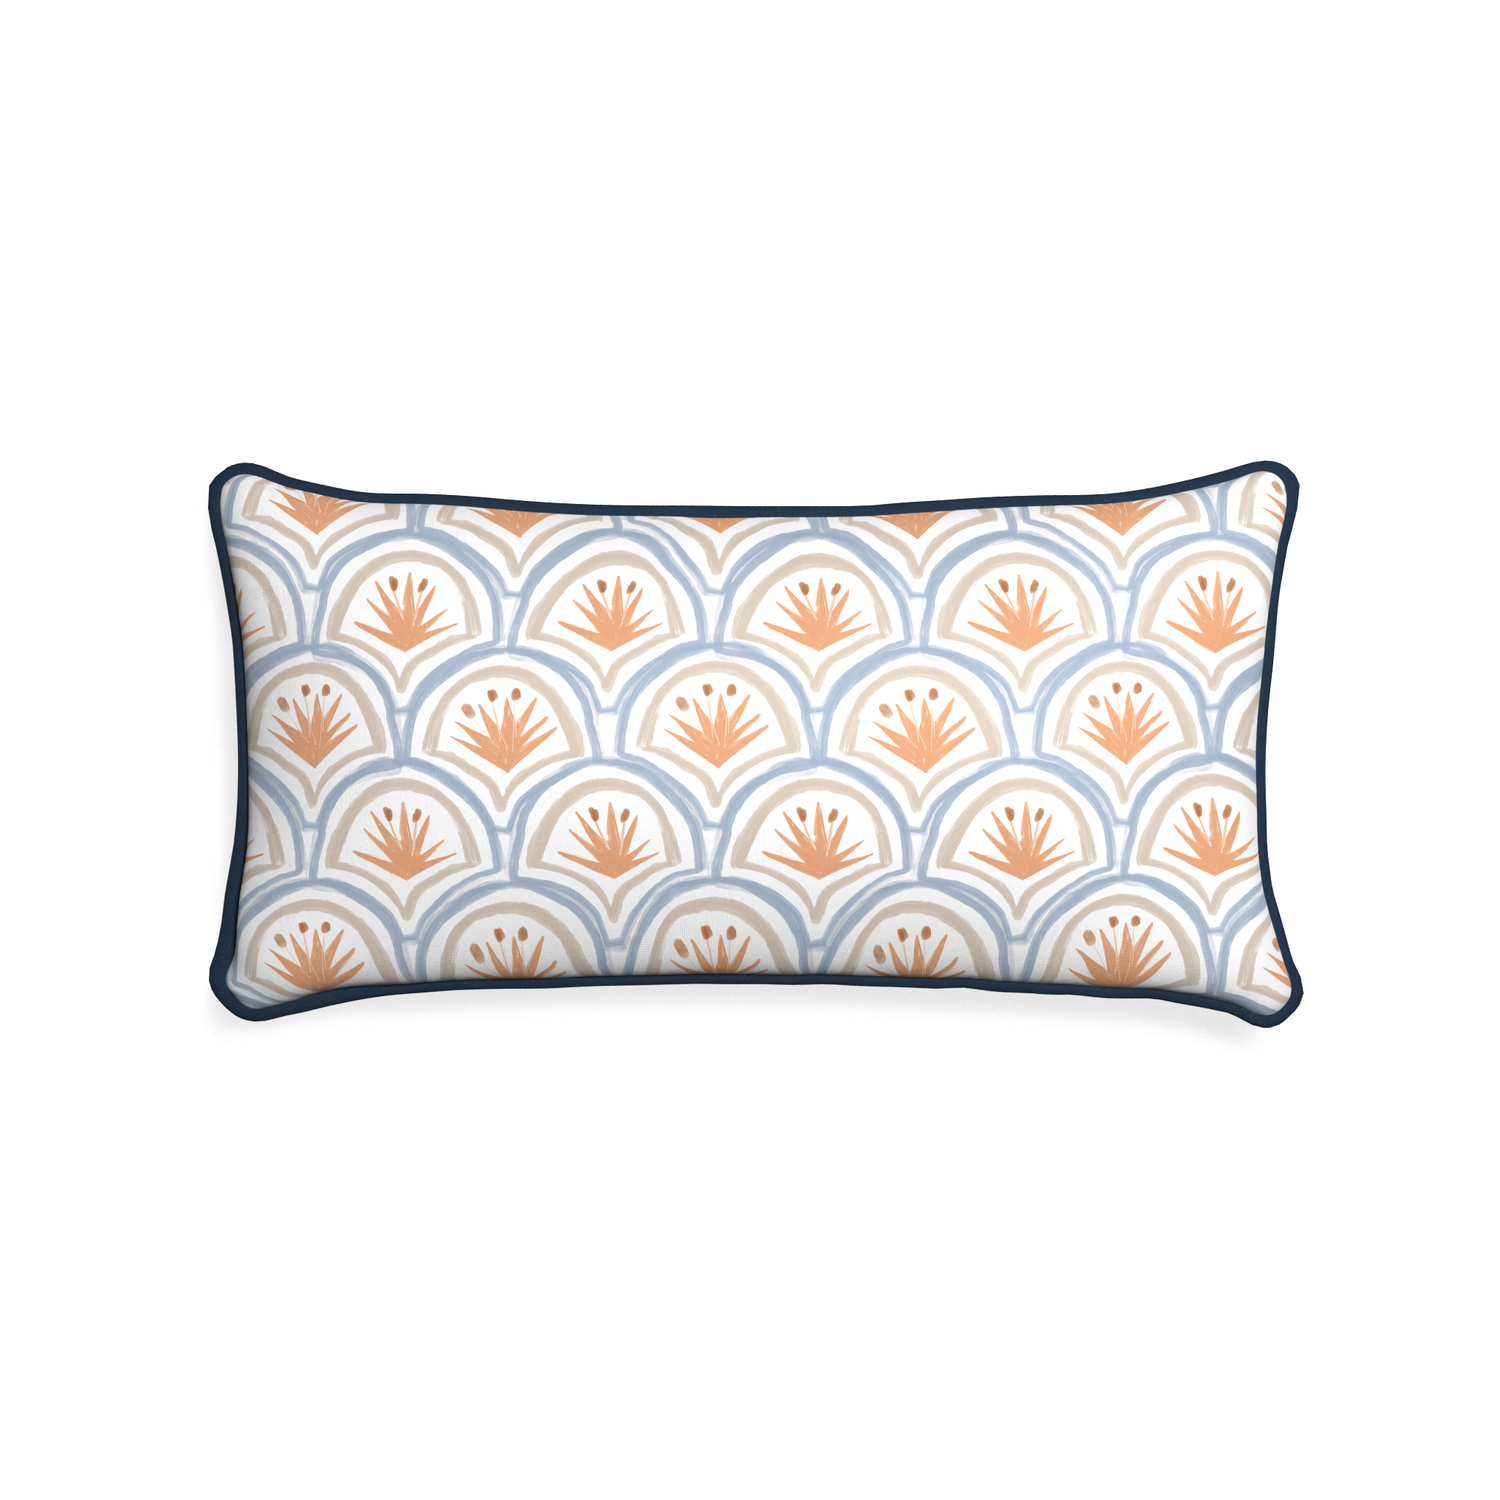 Midi-lumbar thatcher apricot custom art deco palm patternpillow with c piping on white background